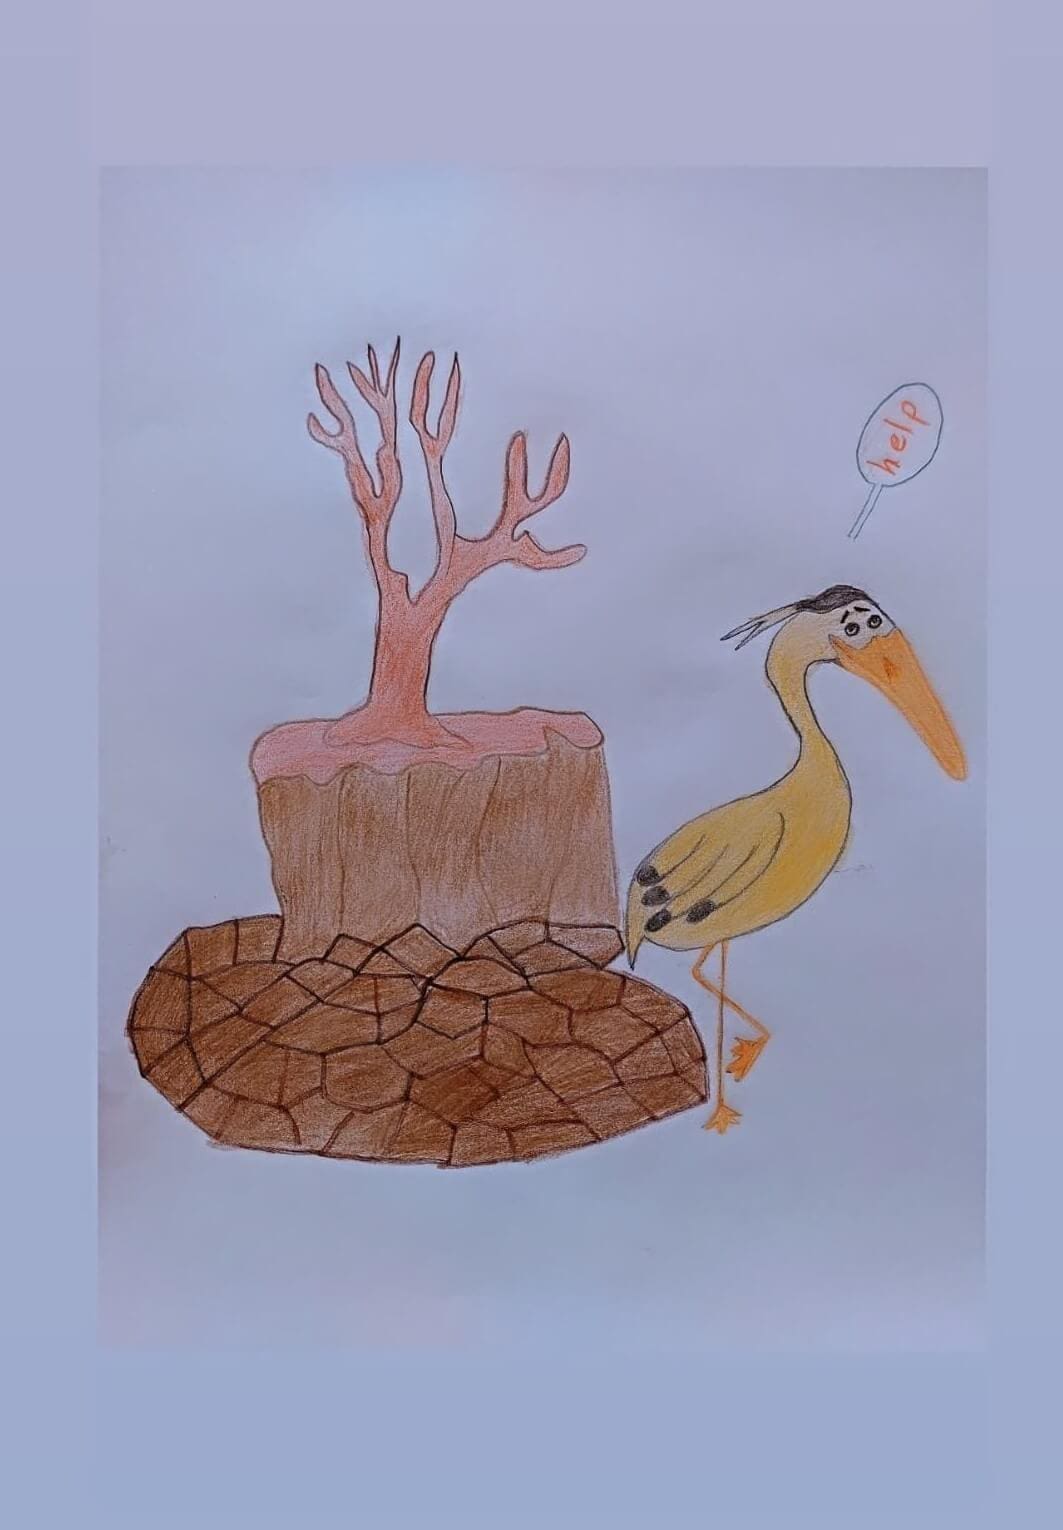 Child drawing by the young artist and ambassador for the environment, Baran Fateminejad, representing a bird asking for help.